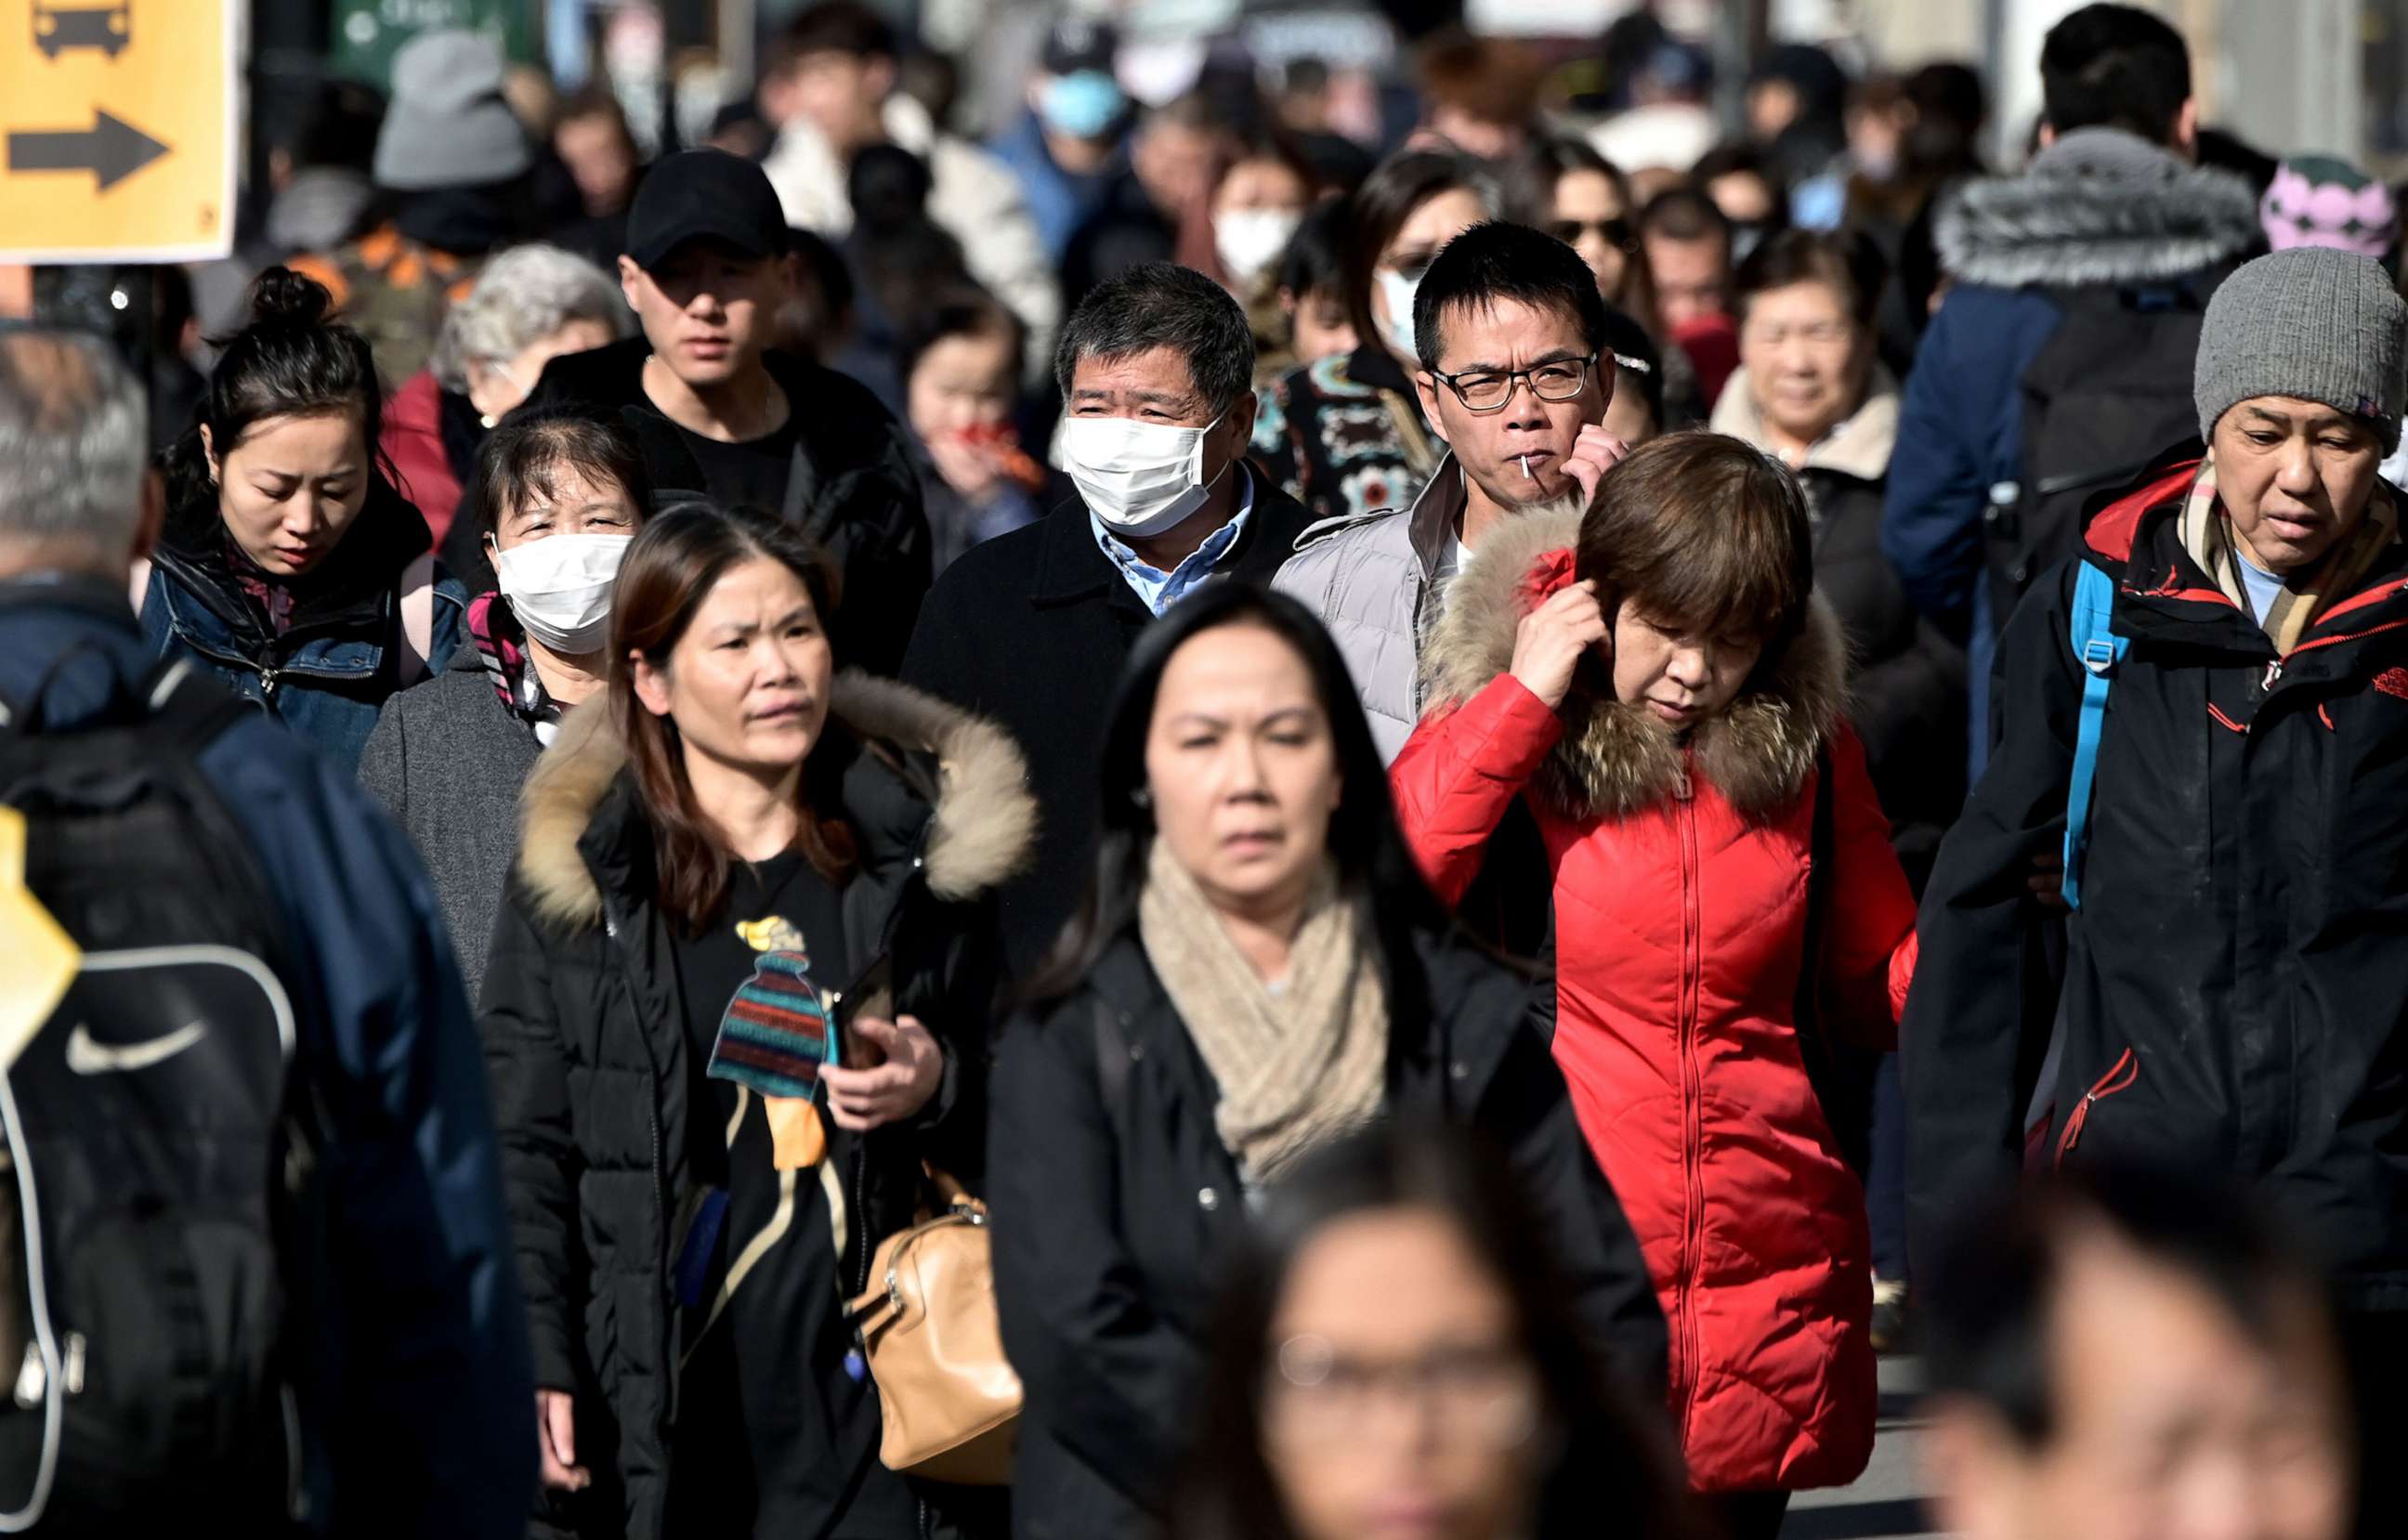 PHOTO: People wear surgical masks in fear of the coronavirus in New York, Feb. 3, 2020.